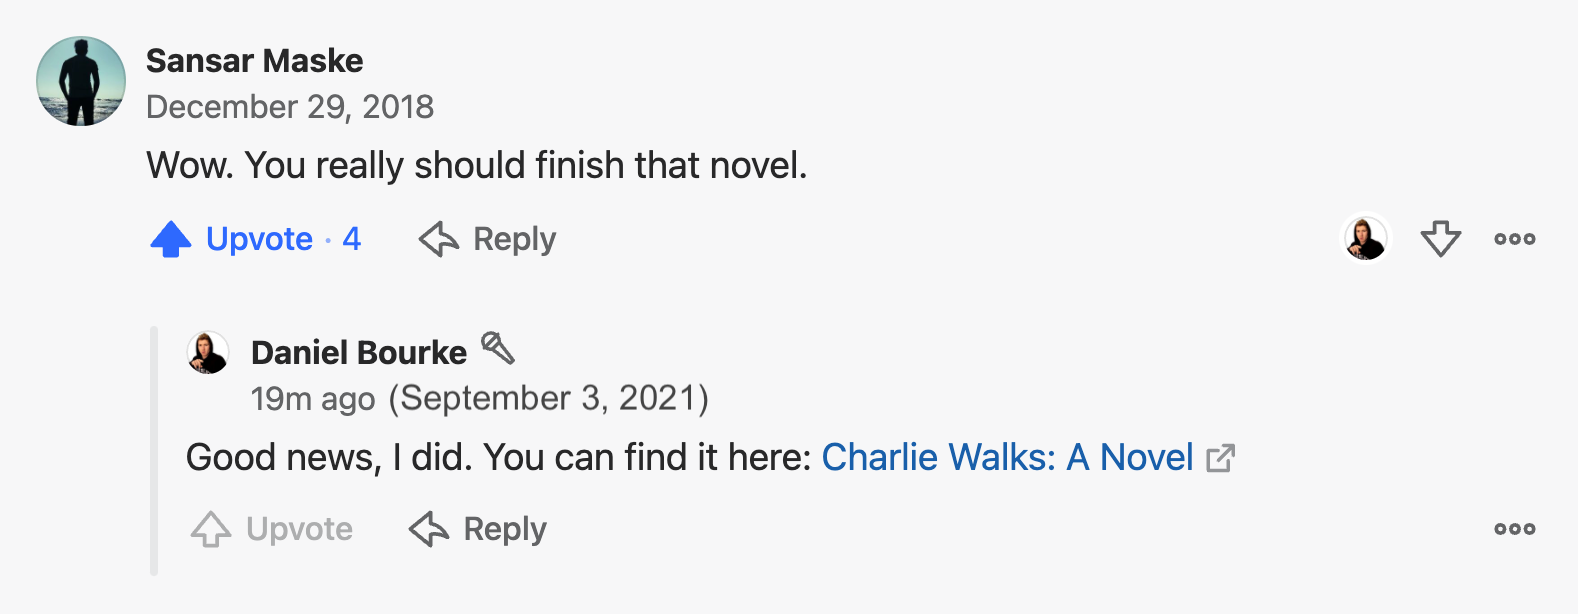 comments, one saying wow you really should finish that novel and another (3 years later) saying good news, I did